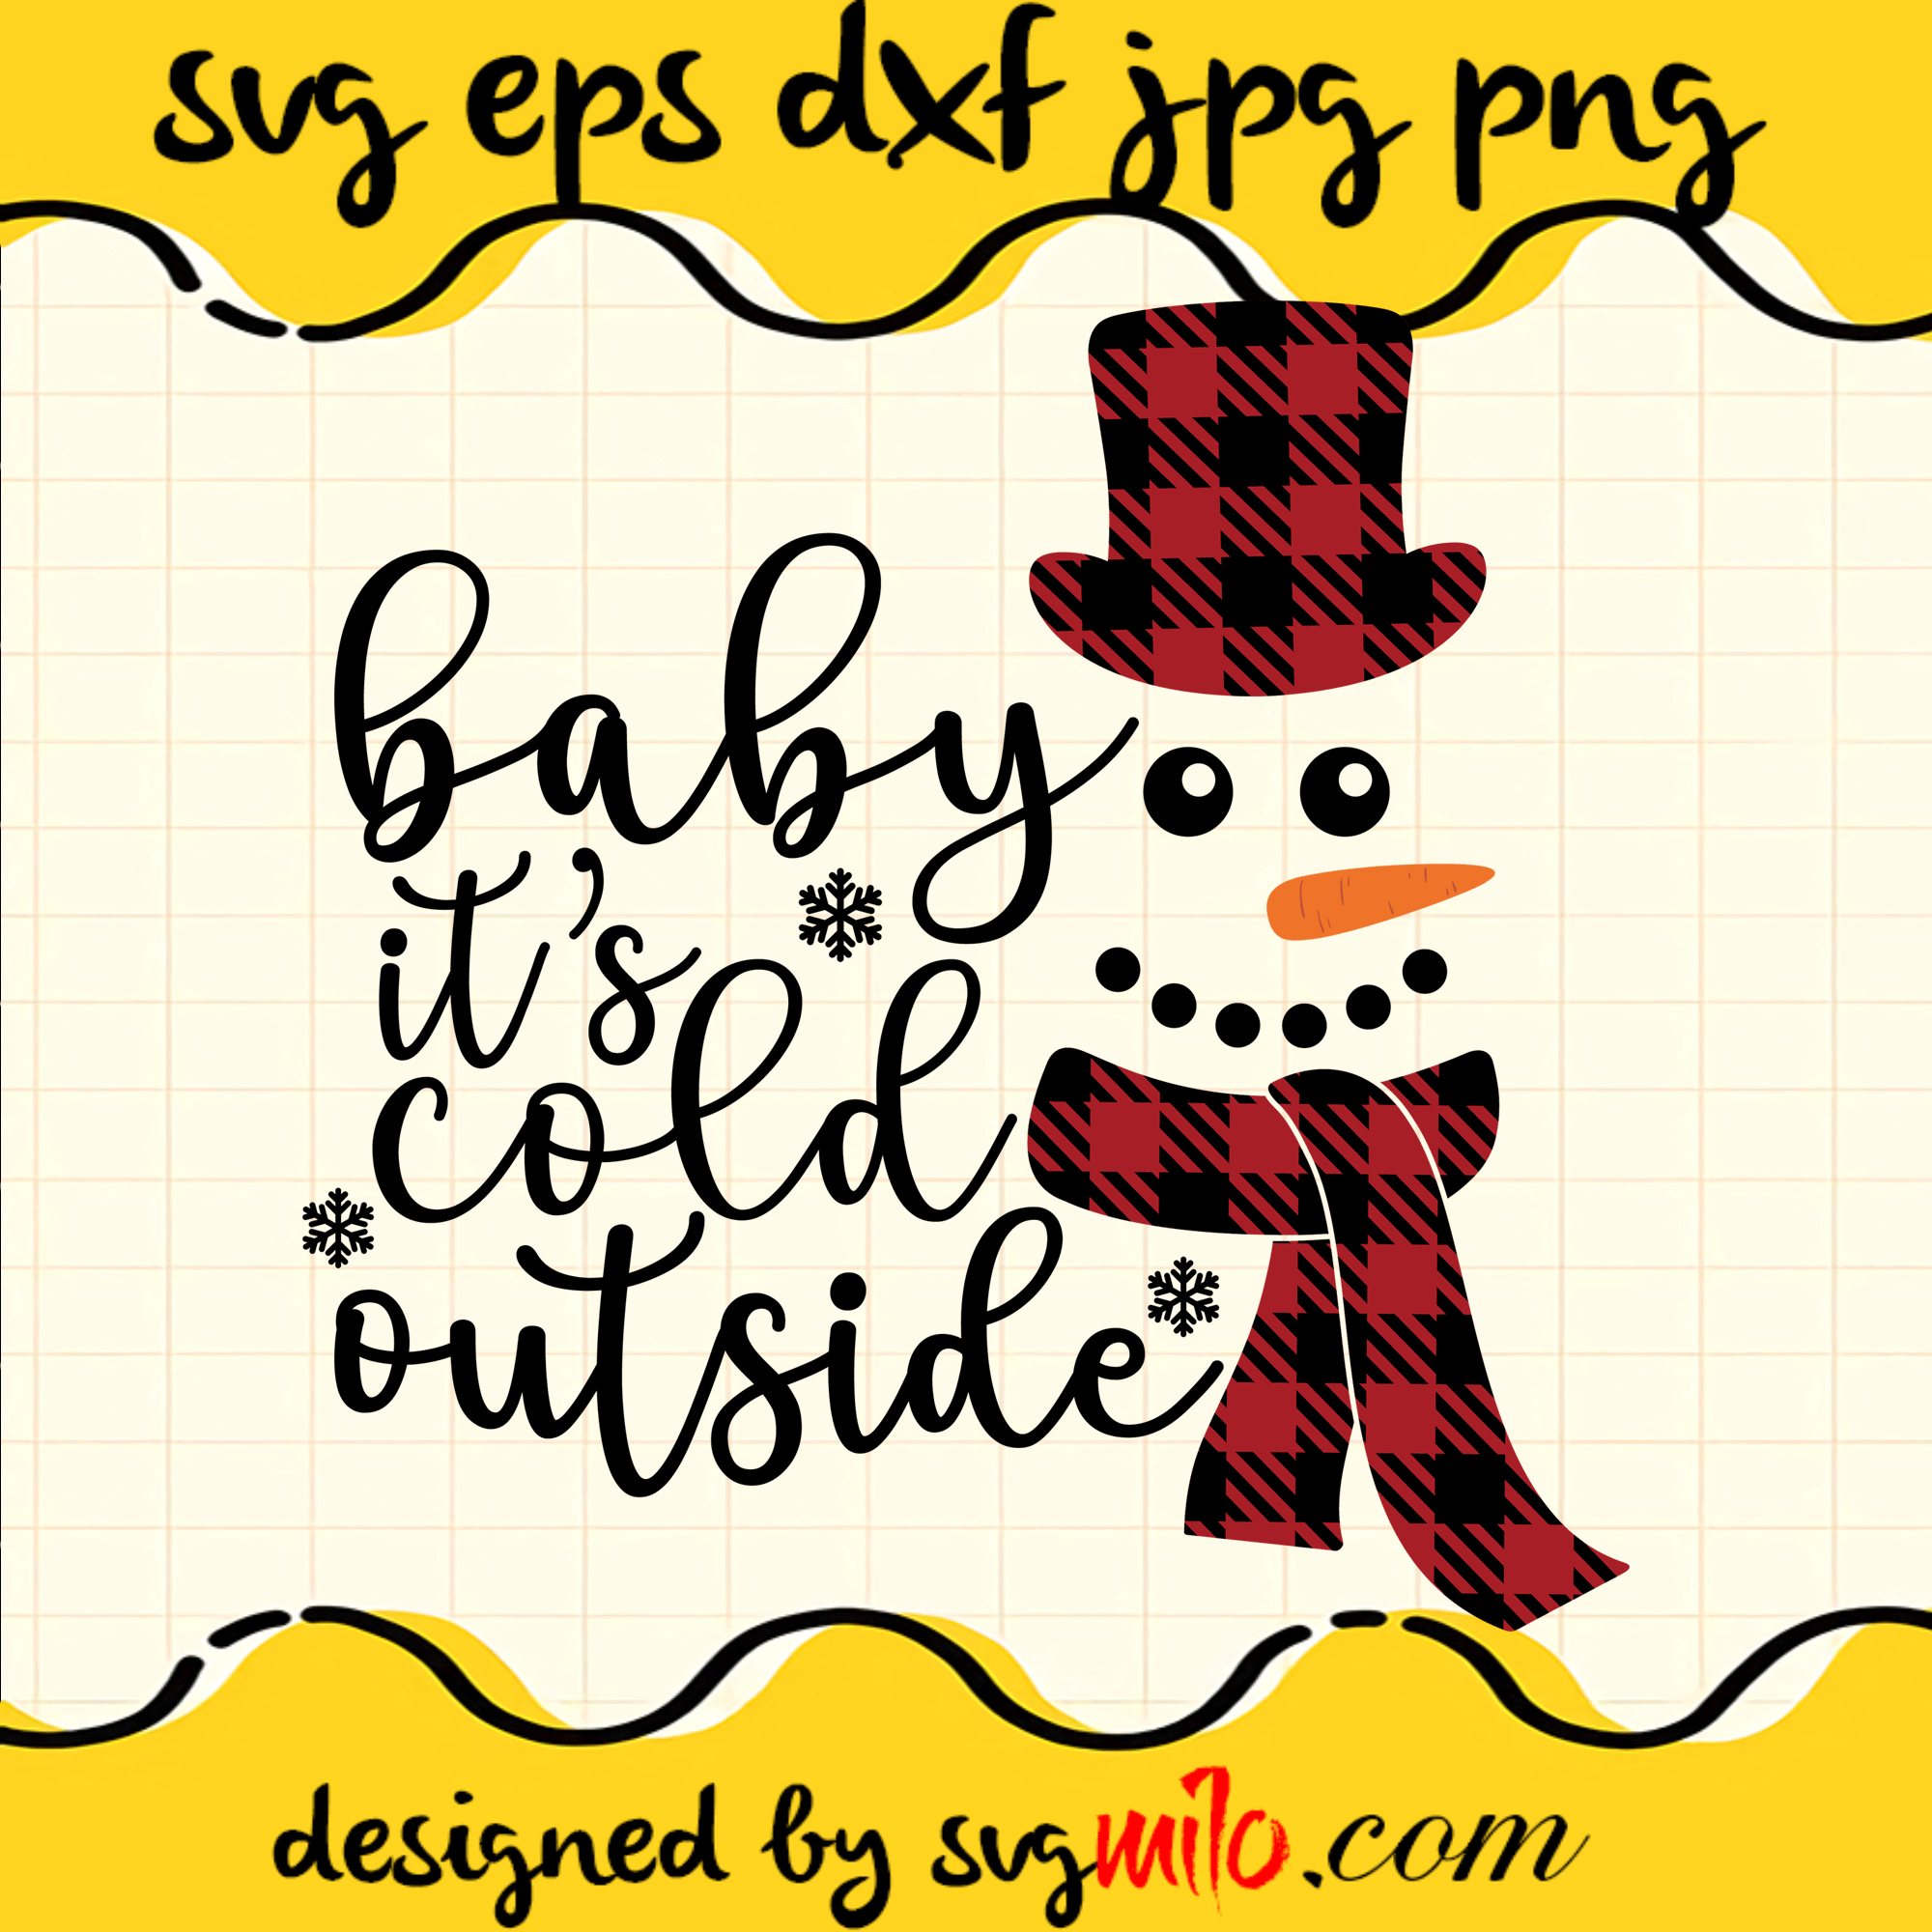 Baby Its Cold Outside SVG, Christmas SVG, EPS, PNG, DXF, Premium Quality - SVGMILO